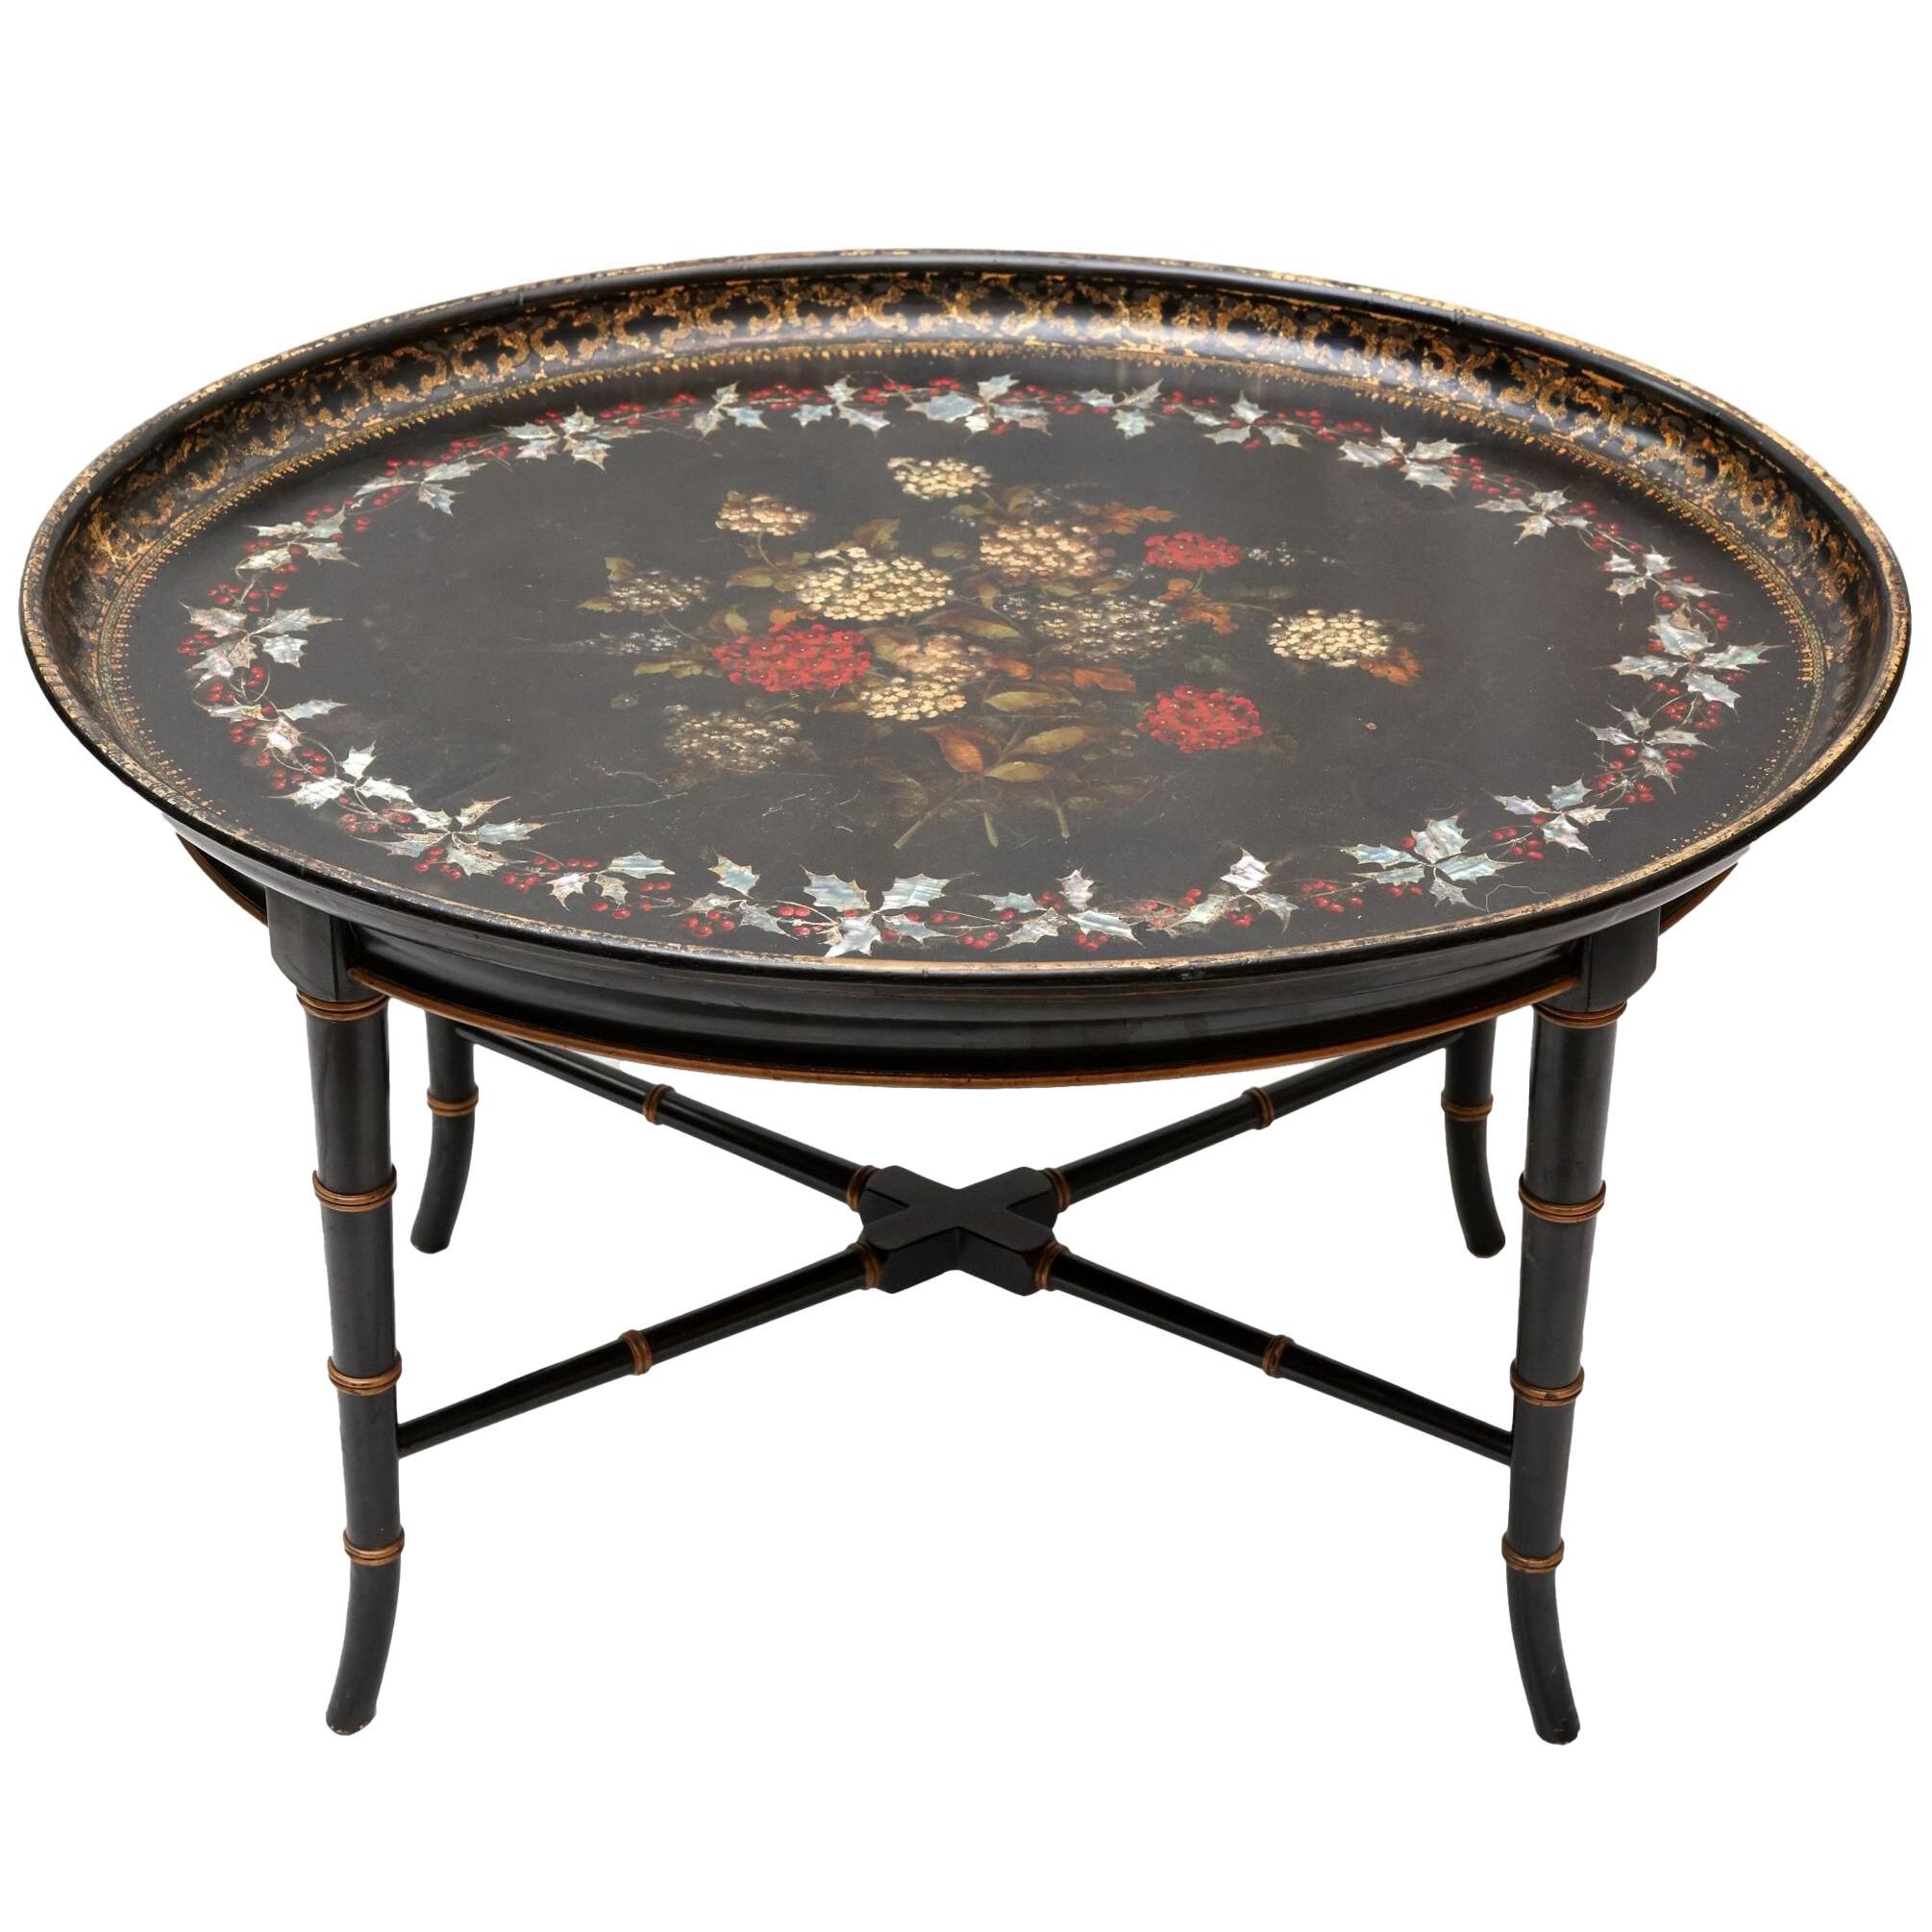 Mother-of-Pearl Inlaid and Ebonized Paper Mache Tray Table, English, ca. 1850